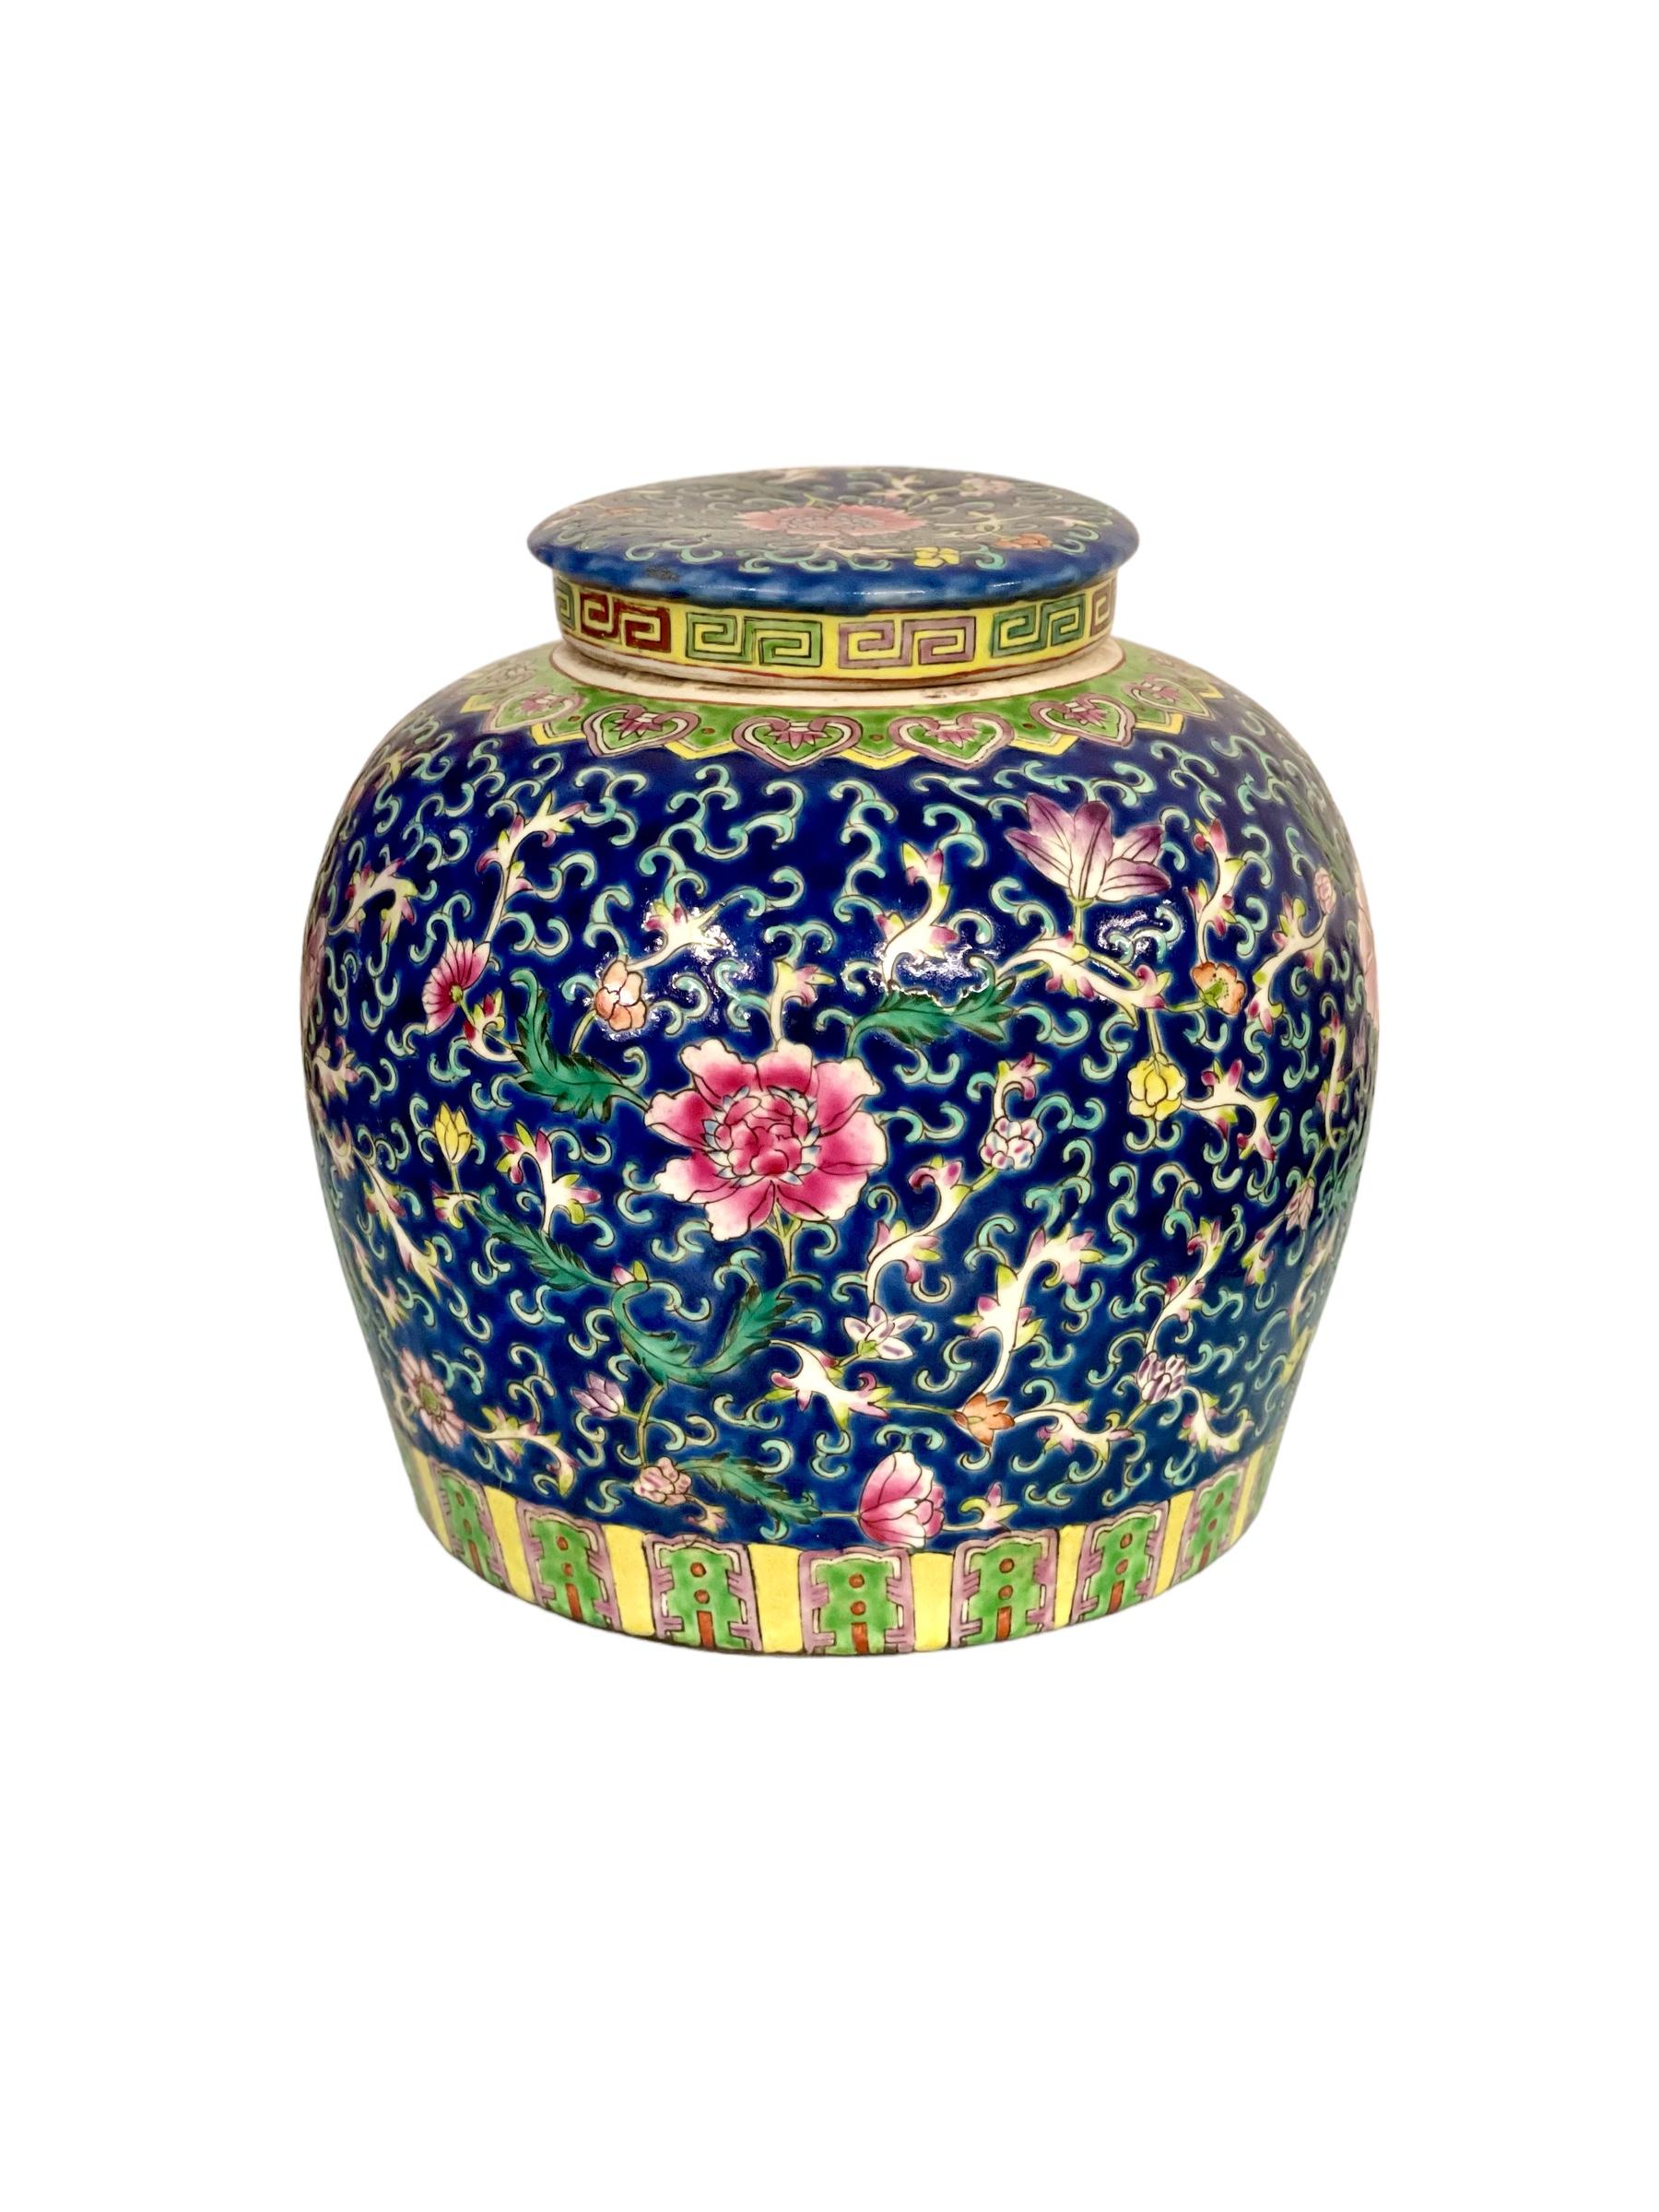 A large and very striking hand-painted lidded pot in Straits porcelain, featuring a vibrant cobalt-blue background with profusely detailed enamelled foliage and 'Famille Rose' (or Fencai) motifs in a colourful palette. The base features a stylised